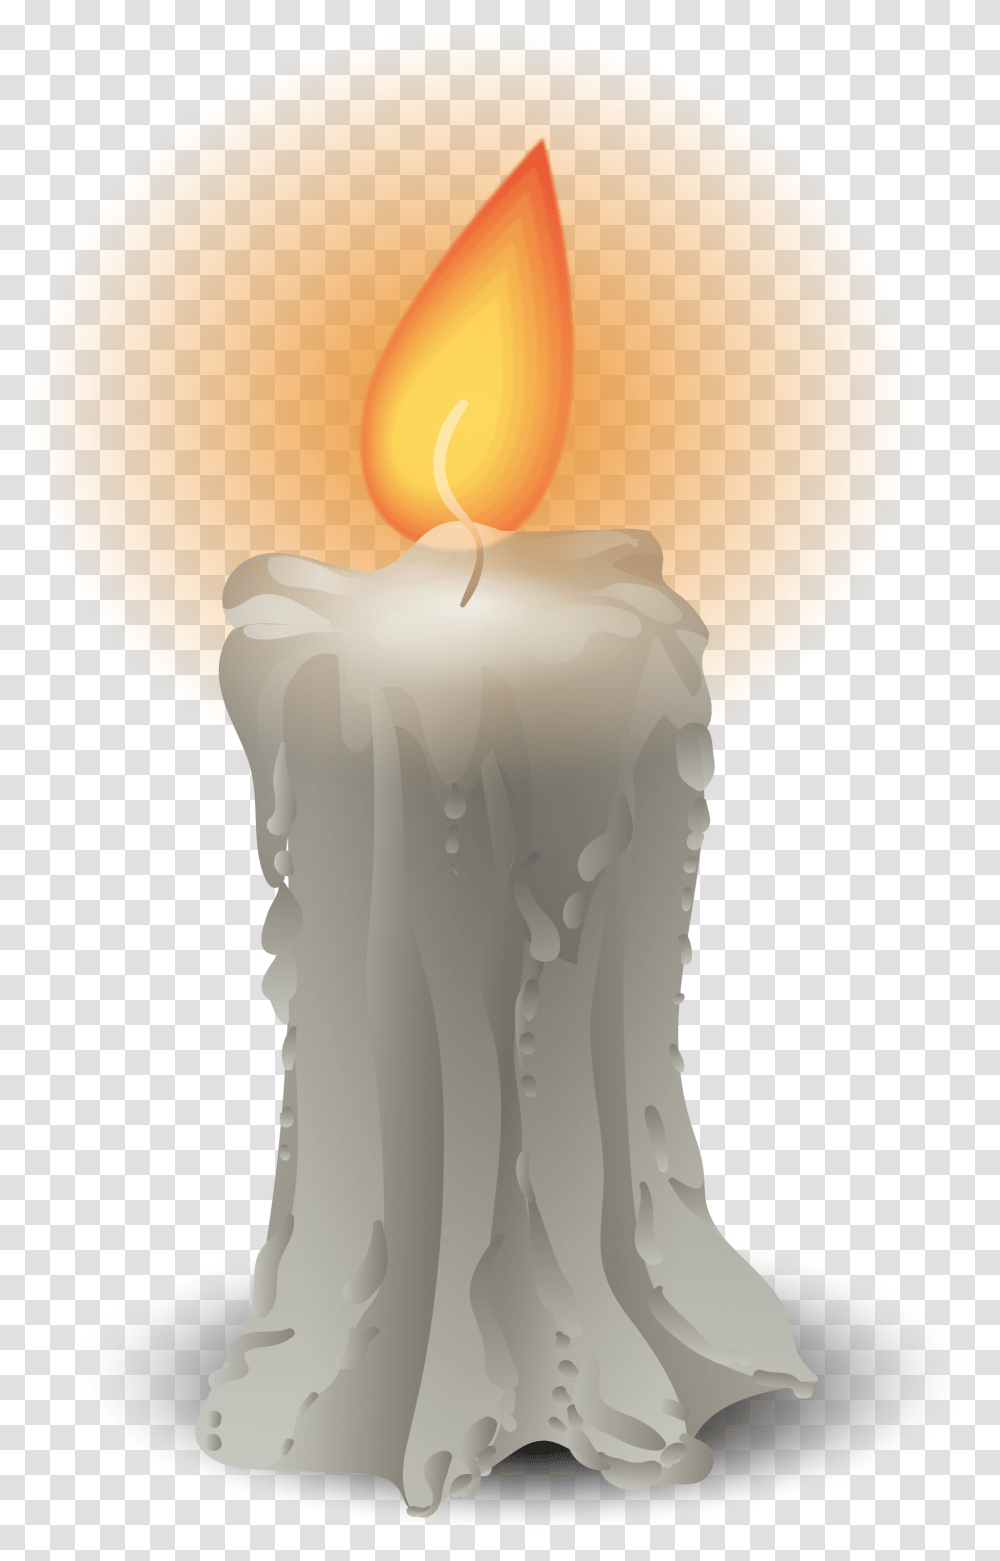 Candle Combustion Wax Burning Candle, Fire, Flame, Lamp Transparent Png